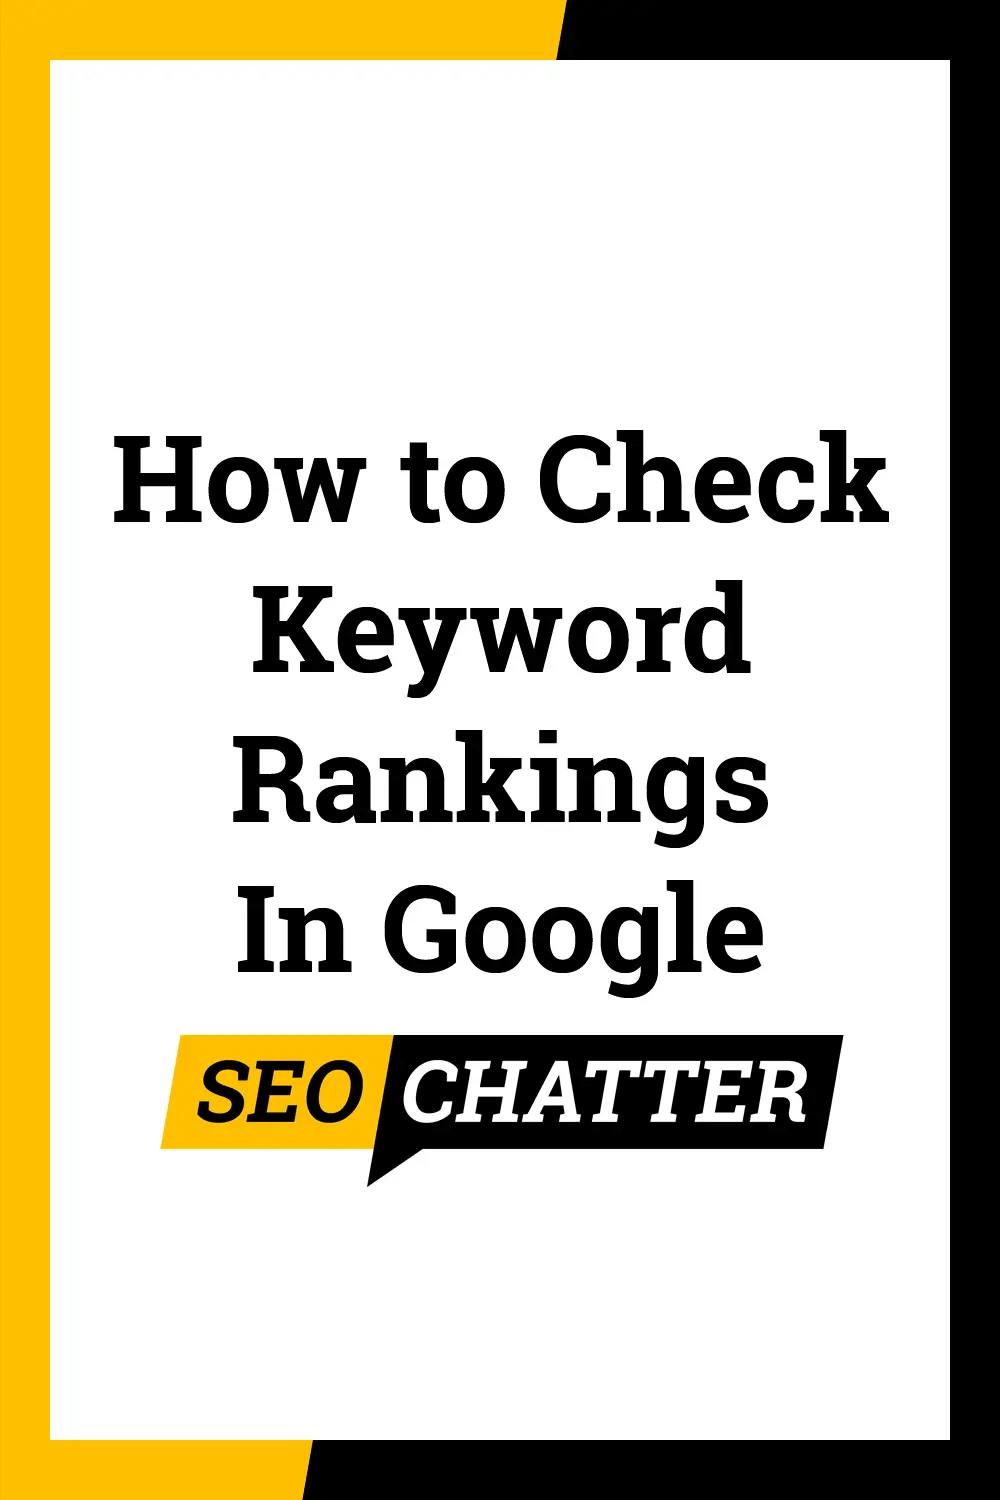 Guide to check keyword rankings in Google